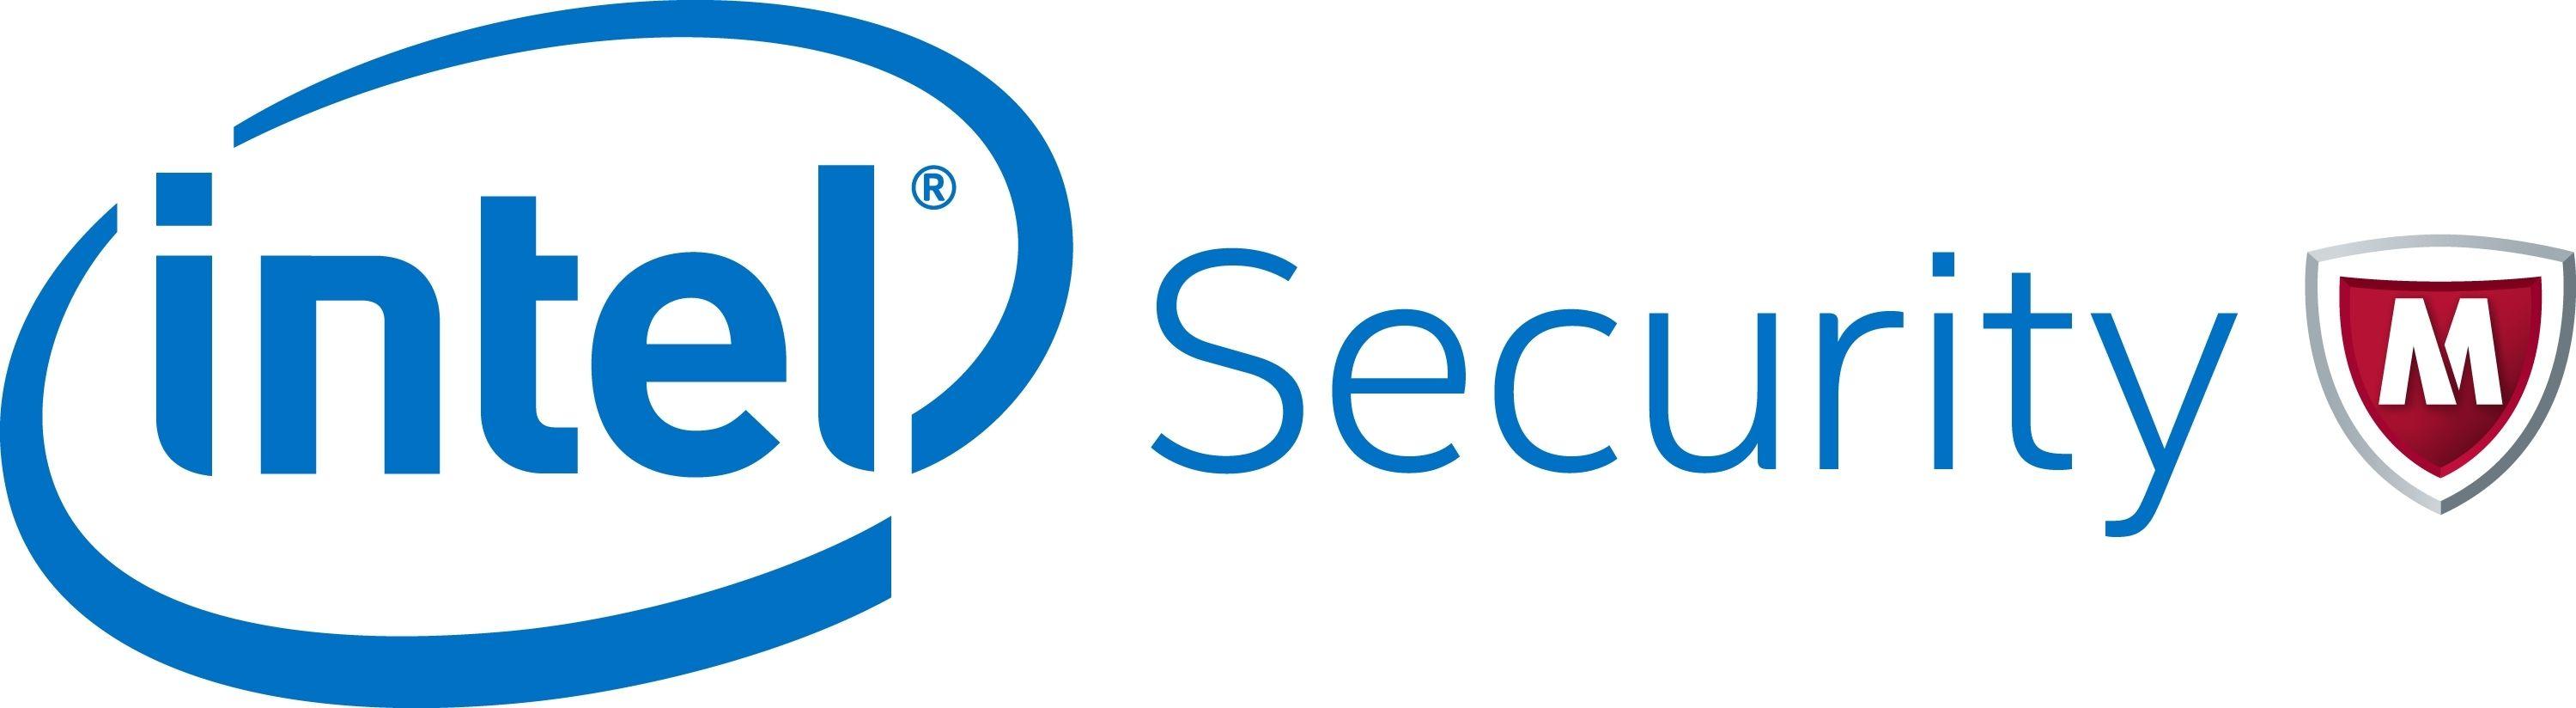 First Intel Logo - Intel Security and Discovery Education Launch First Digital Safety ...